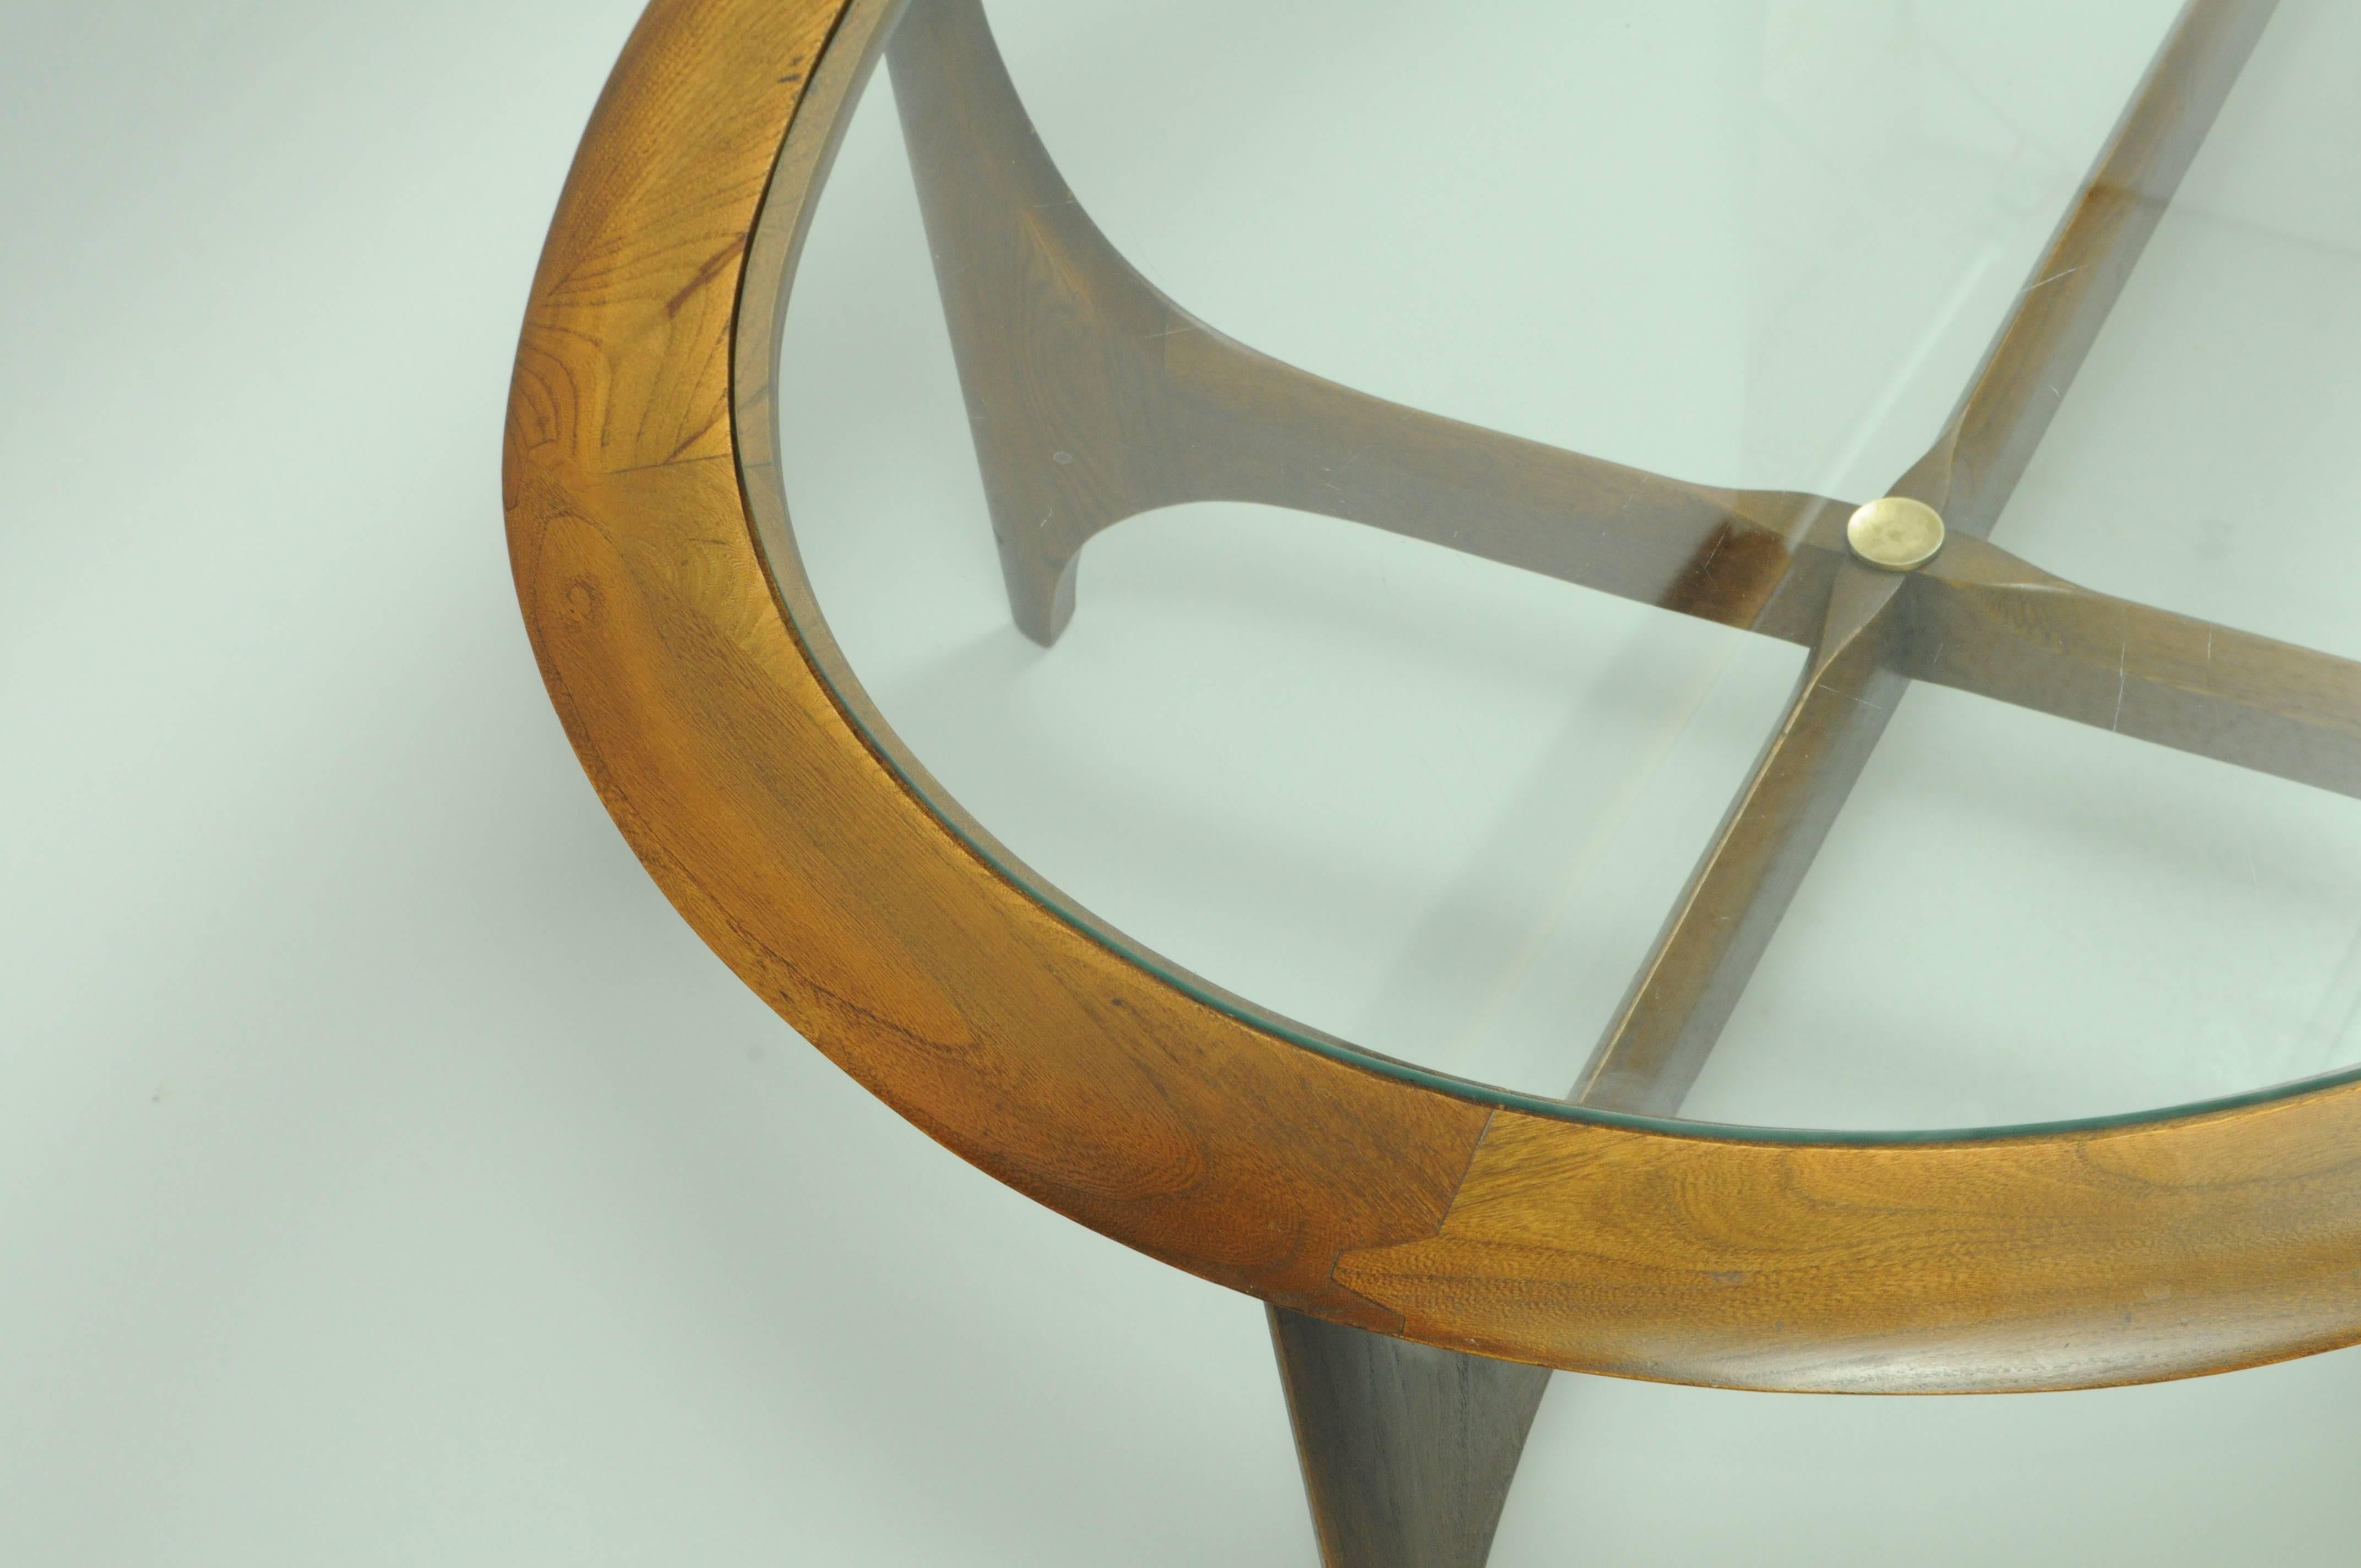 American Vintage Lane Kidney Shaped Boomerang Walnut and Glass Coffee Table